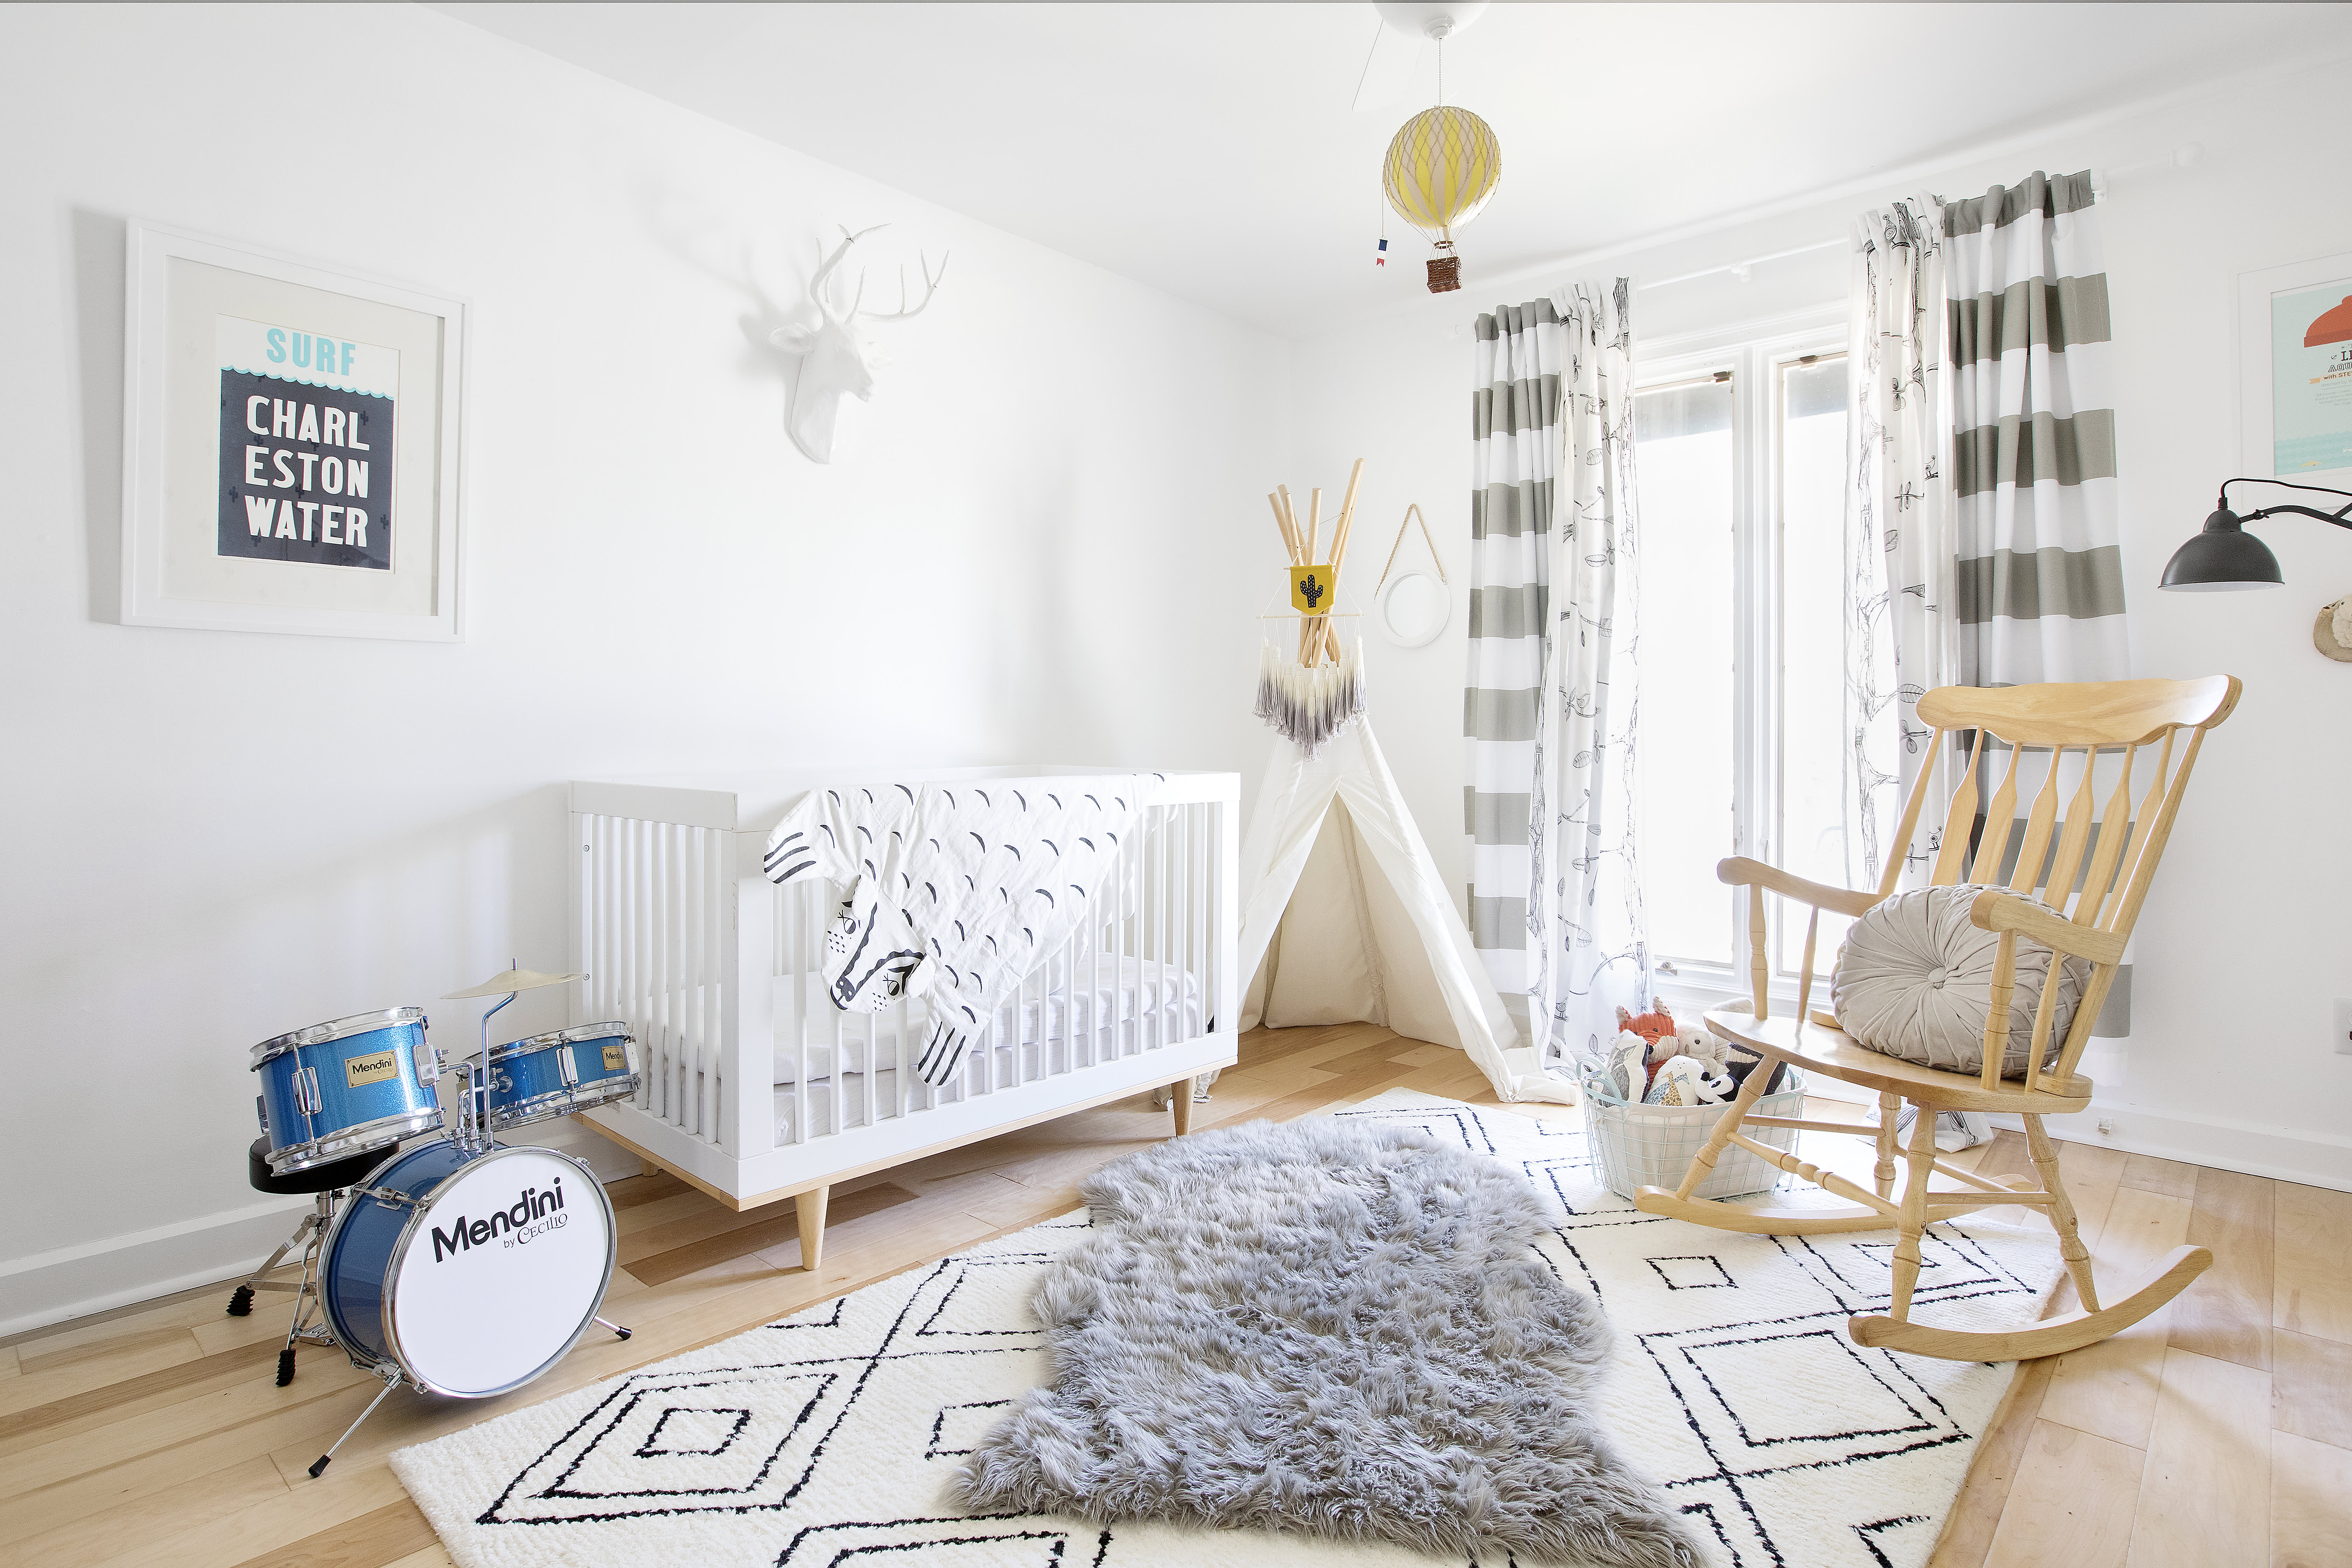 HOW TO BRING A NATURAL VIBE TO THE NURSERY - Kids Interiors